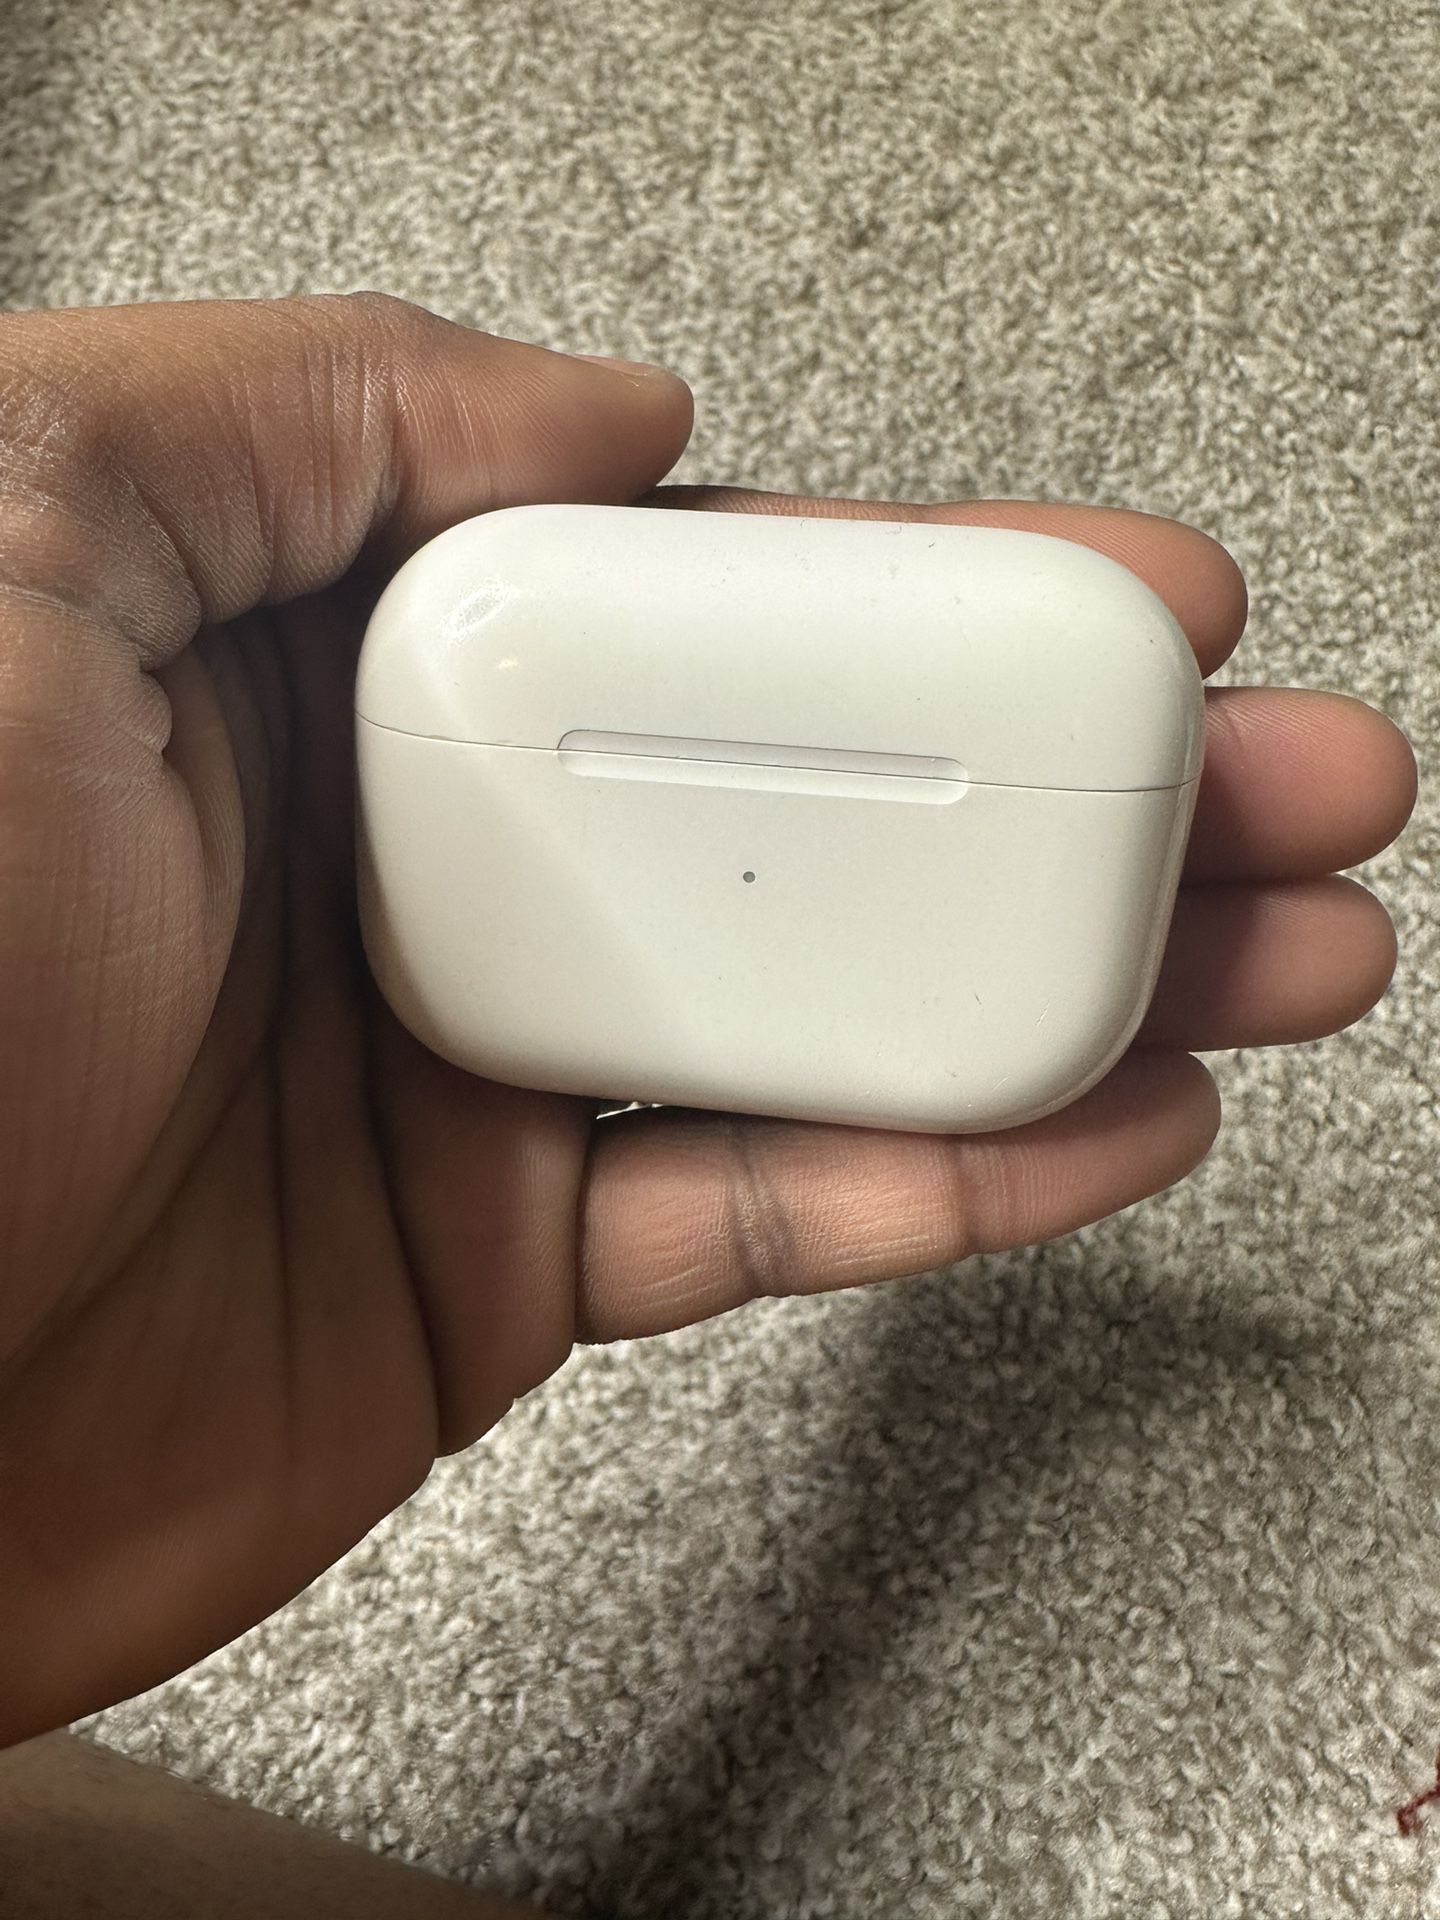 AirPod Pro Charging Case